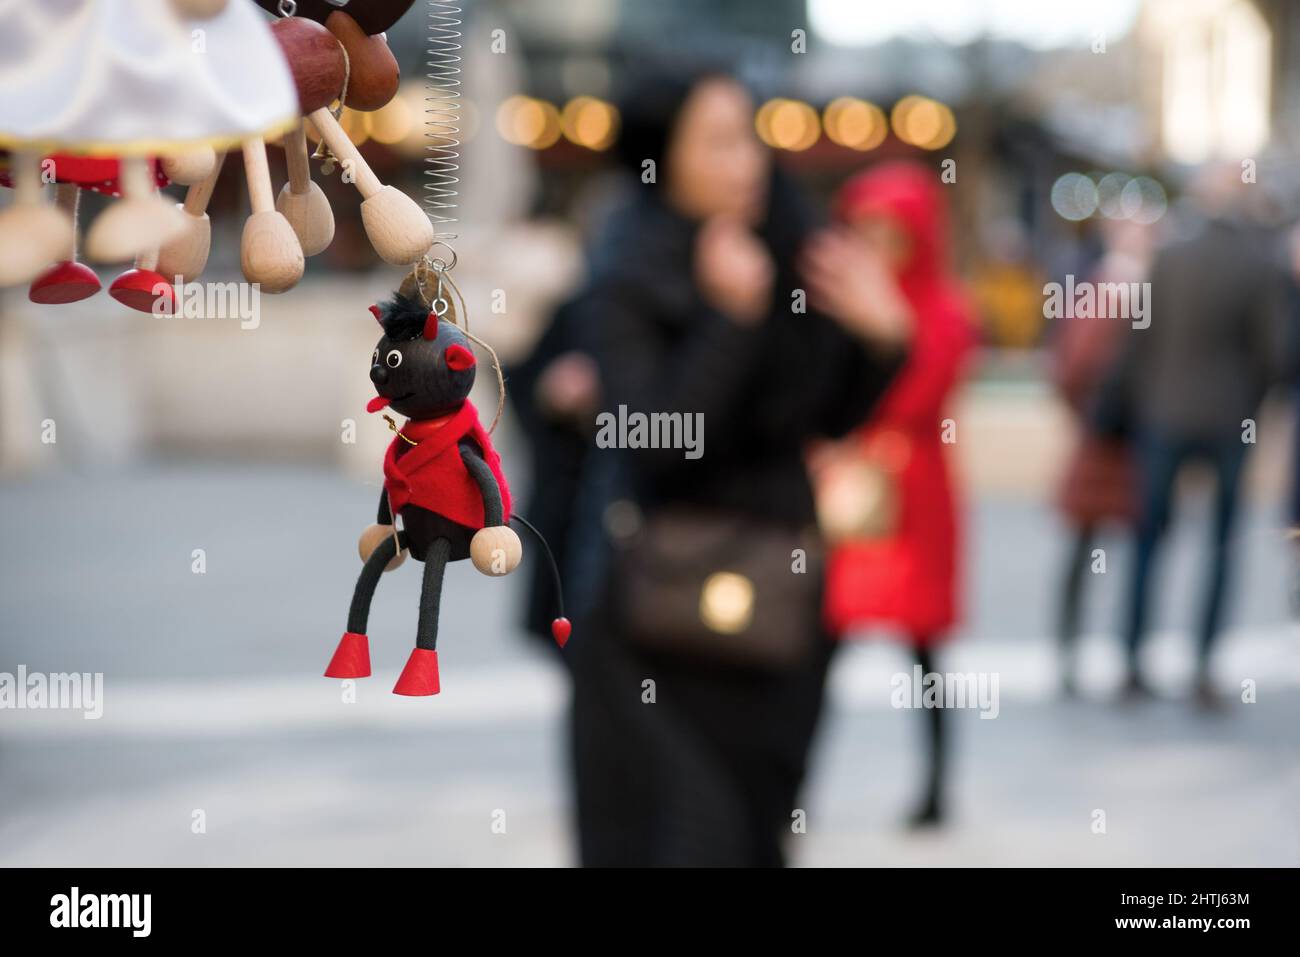 Toy devil against blurred woman walking, symbol of mood or behavior Stock Photo